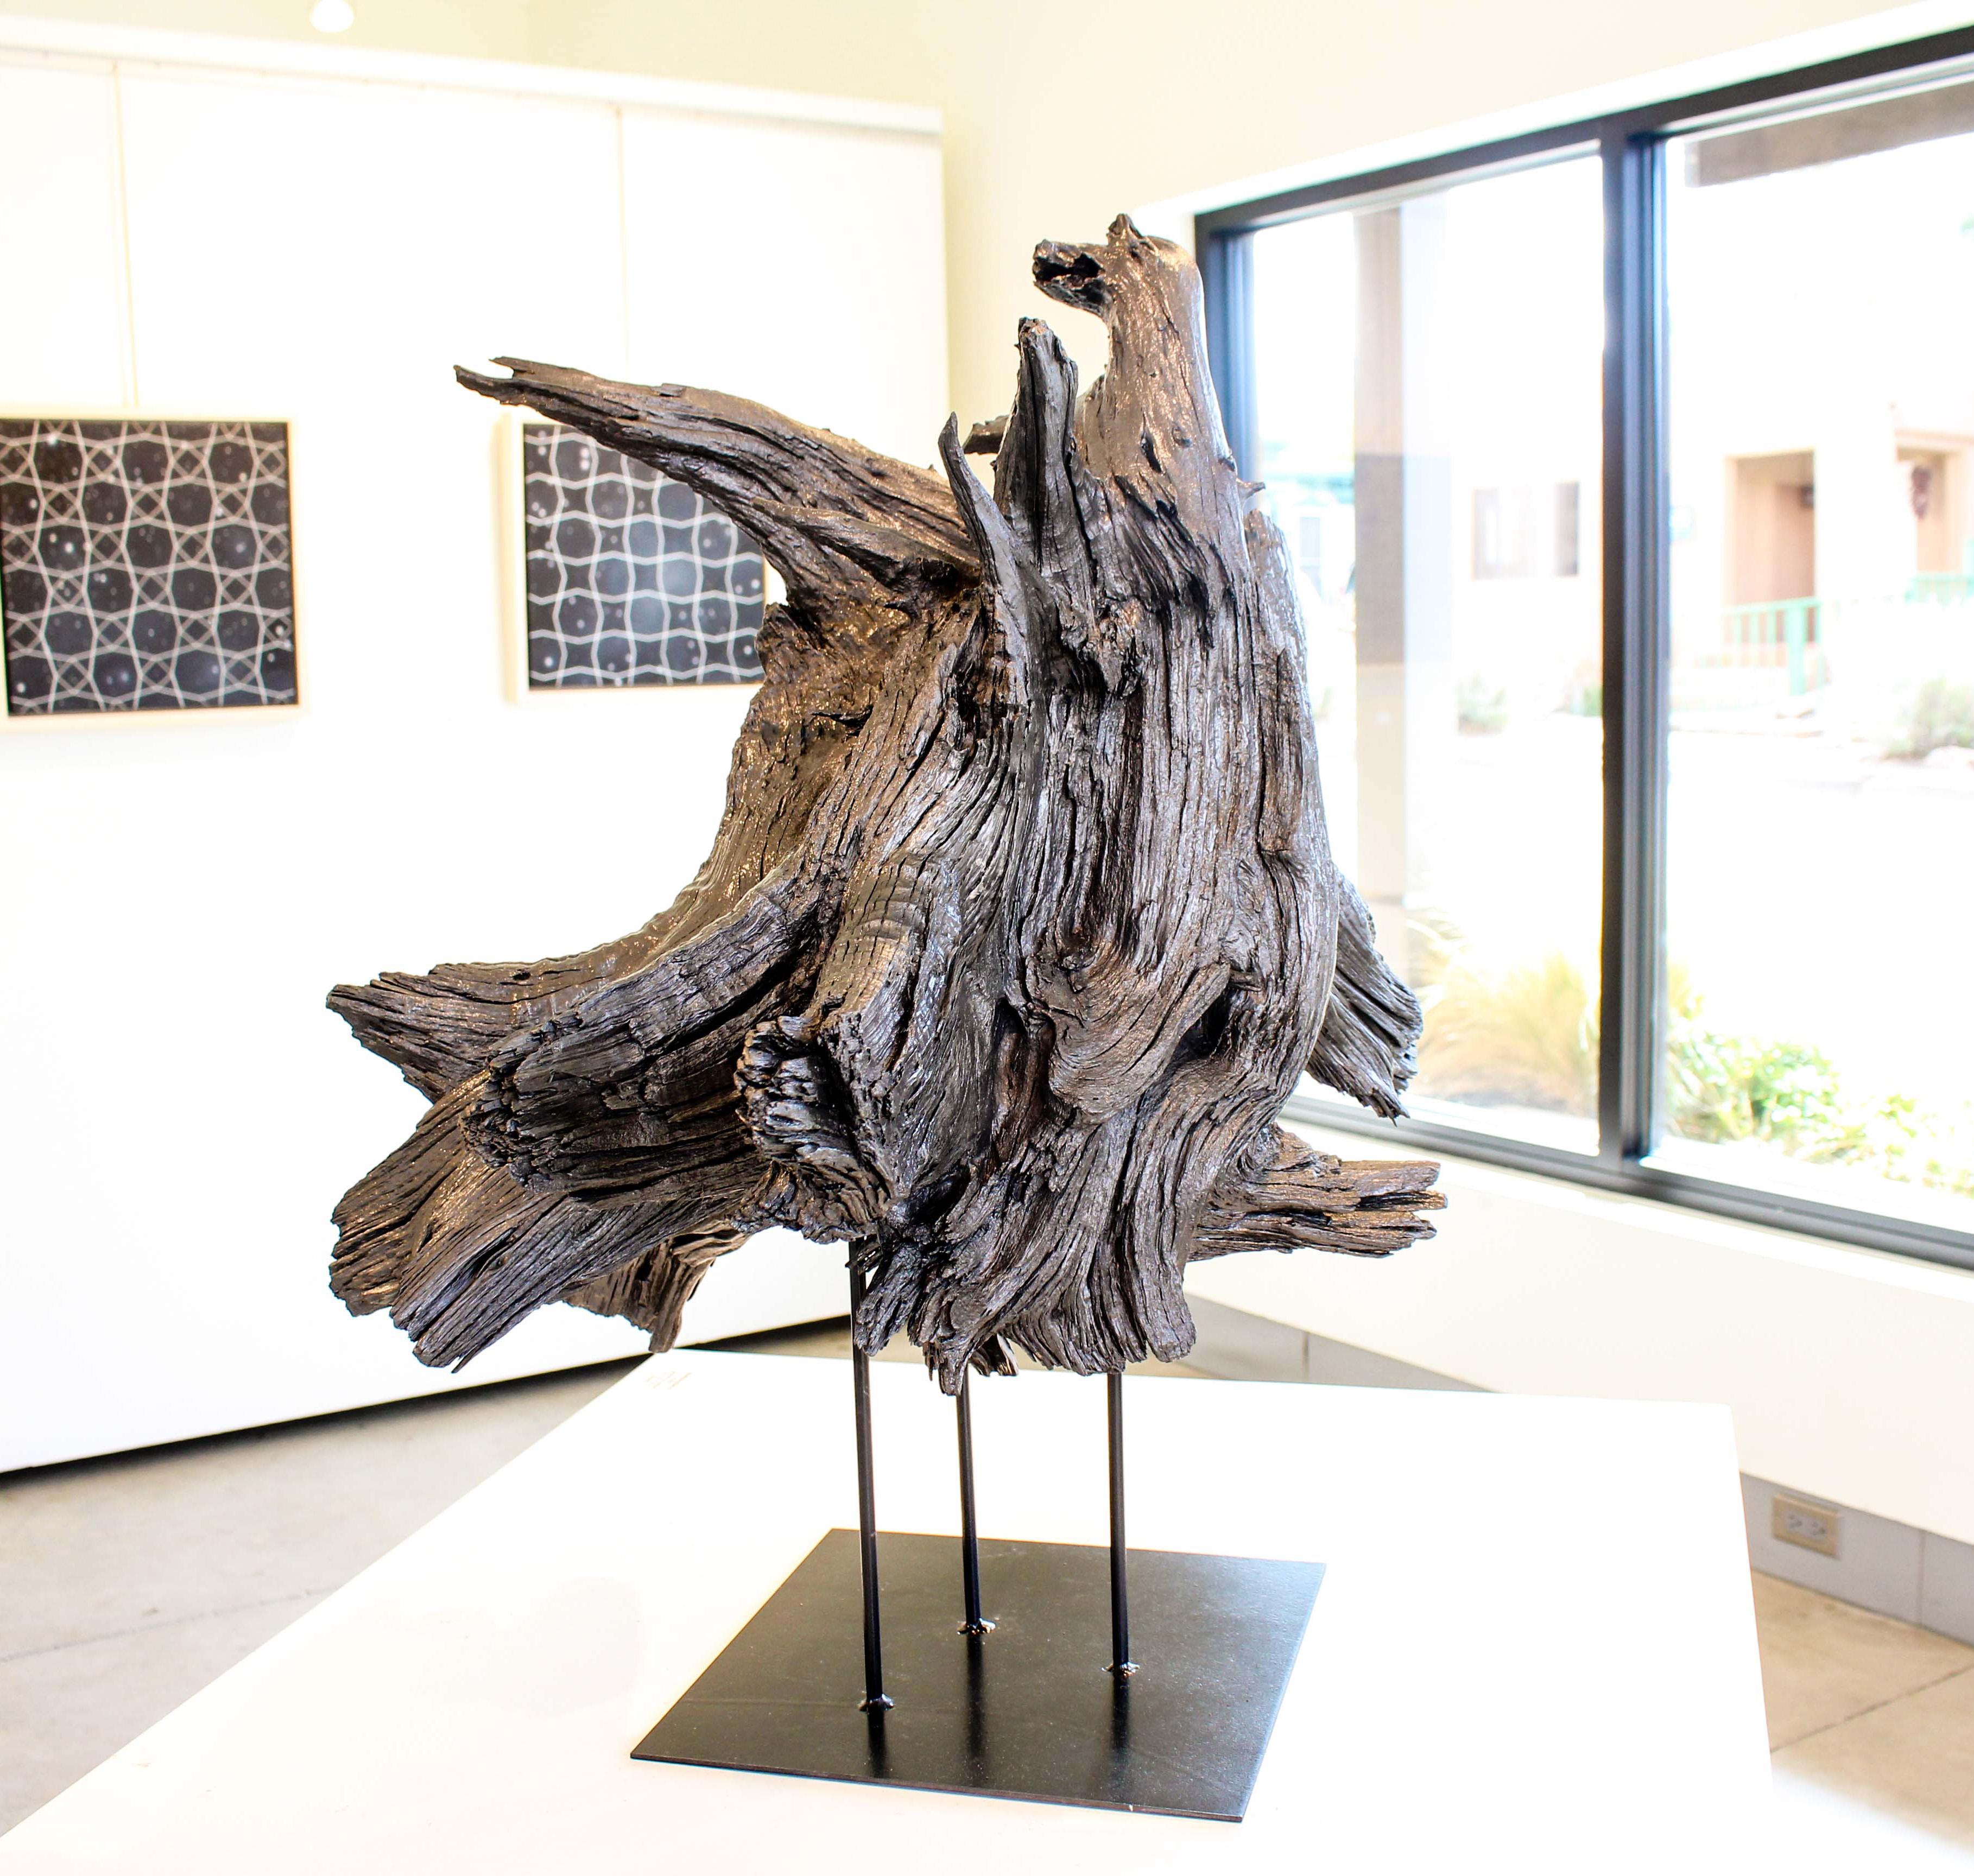 Roots - Contemporary Sculpture by Matthew Mullins